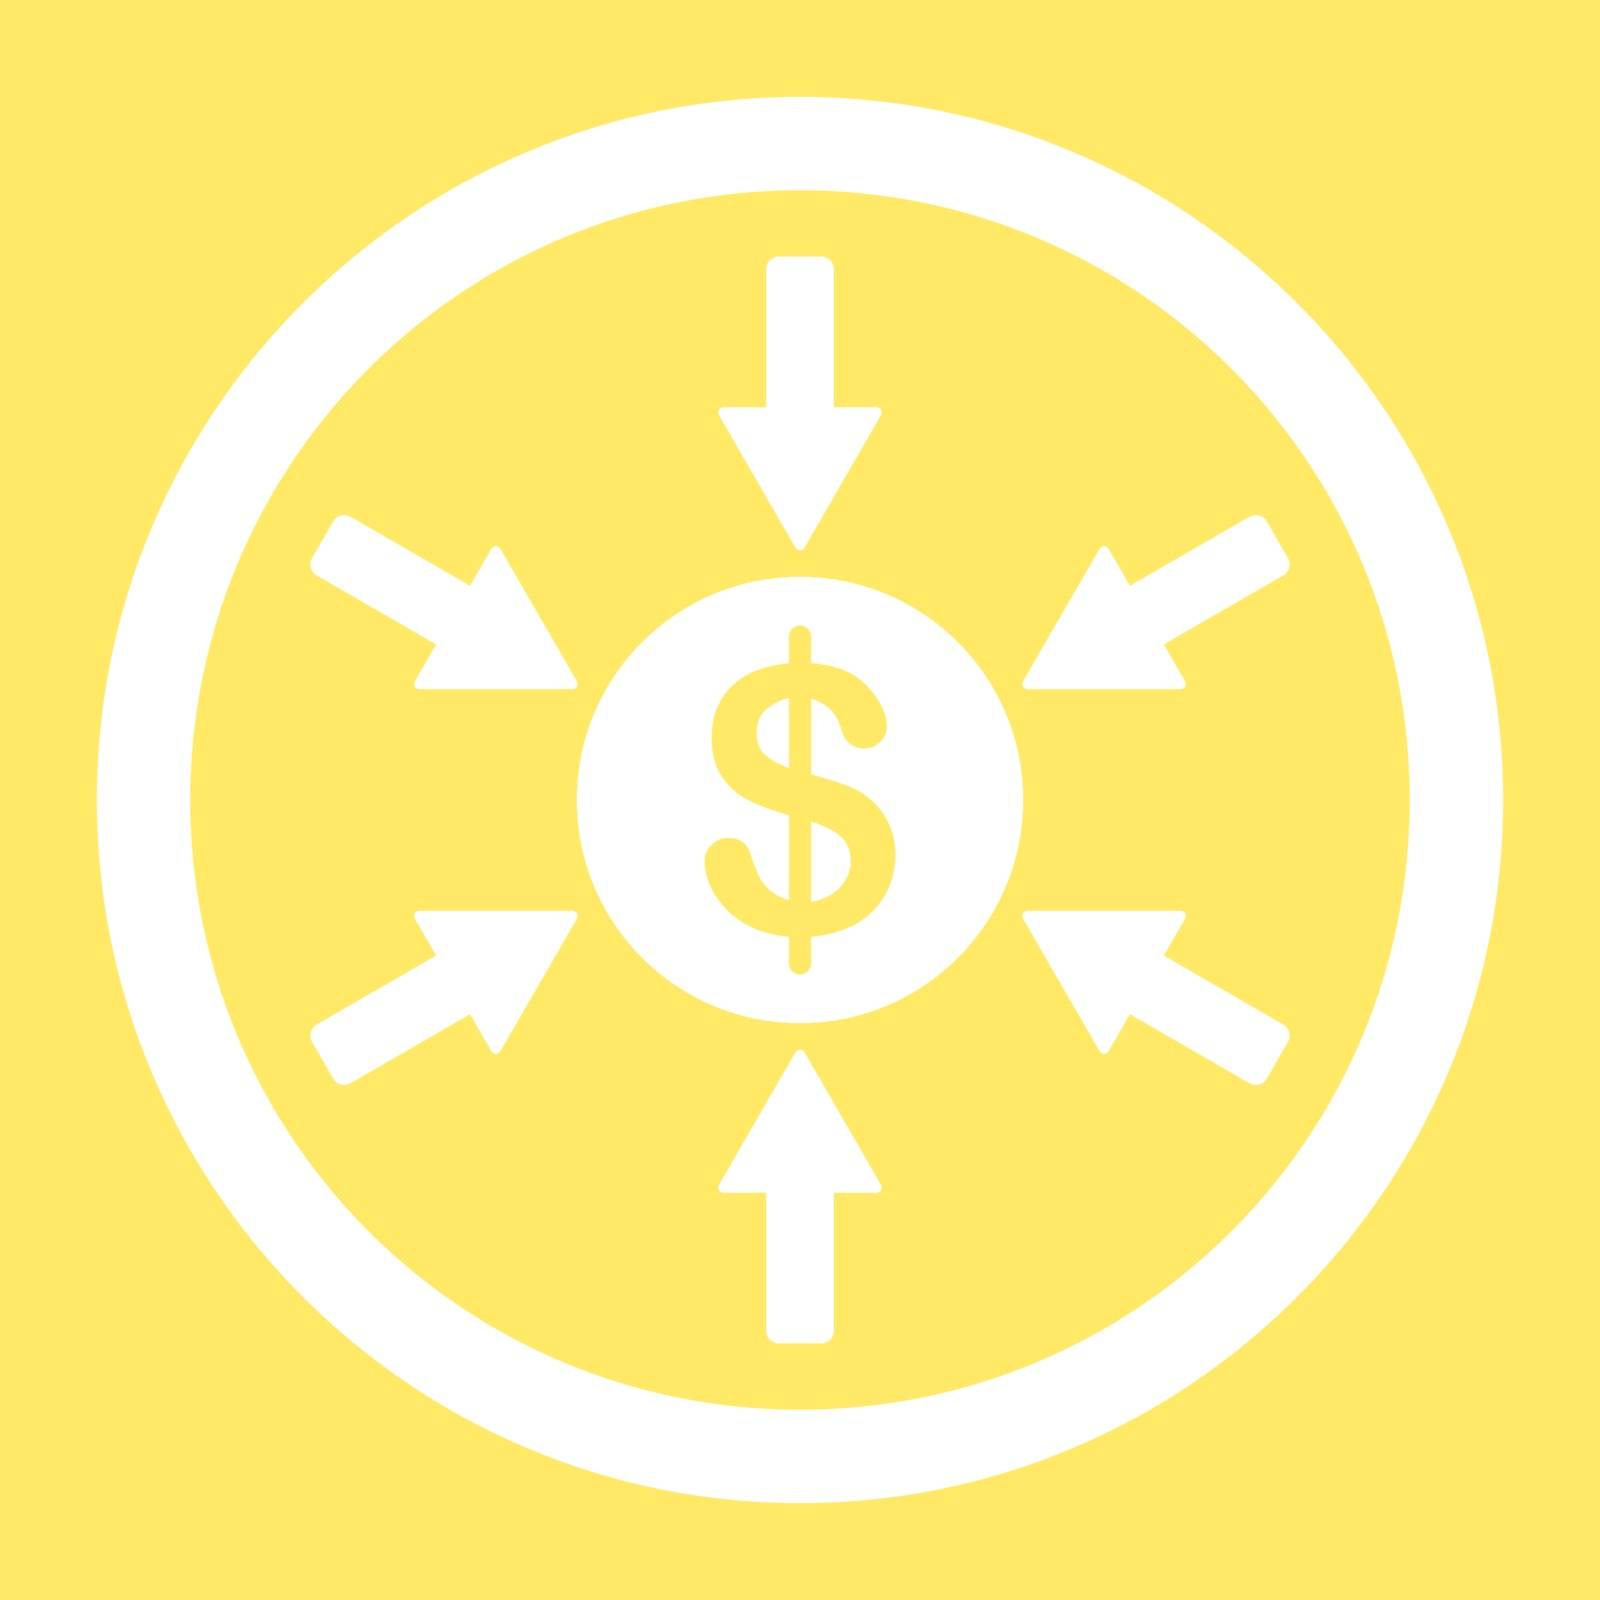 Income vector icon. This flat rounded symbol uses white color and isolated on a yellow background.